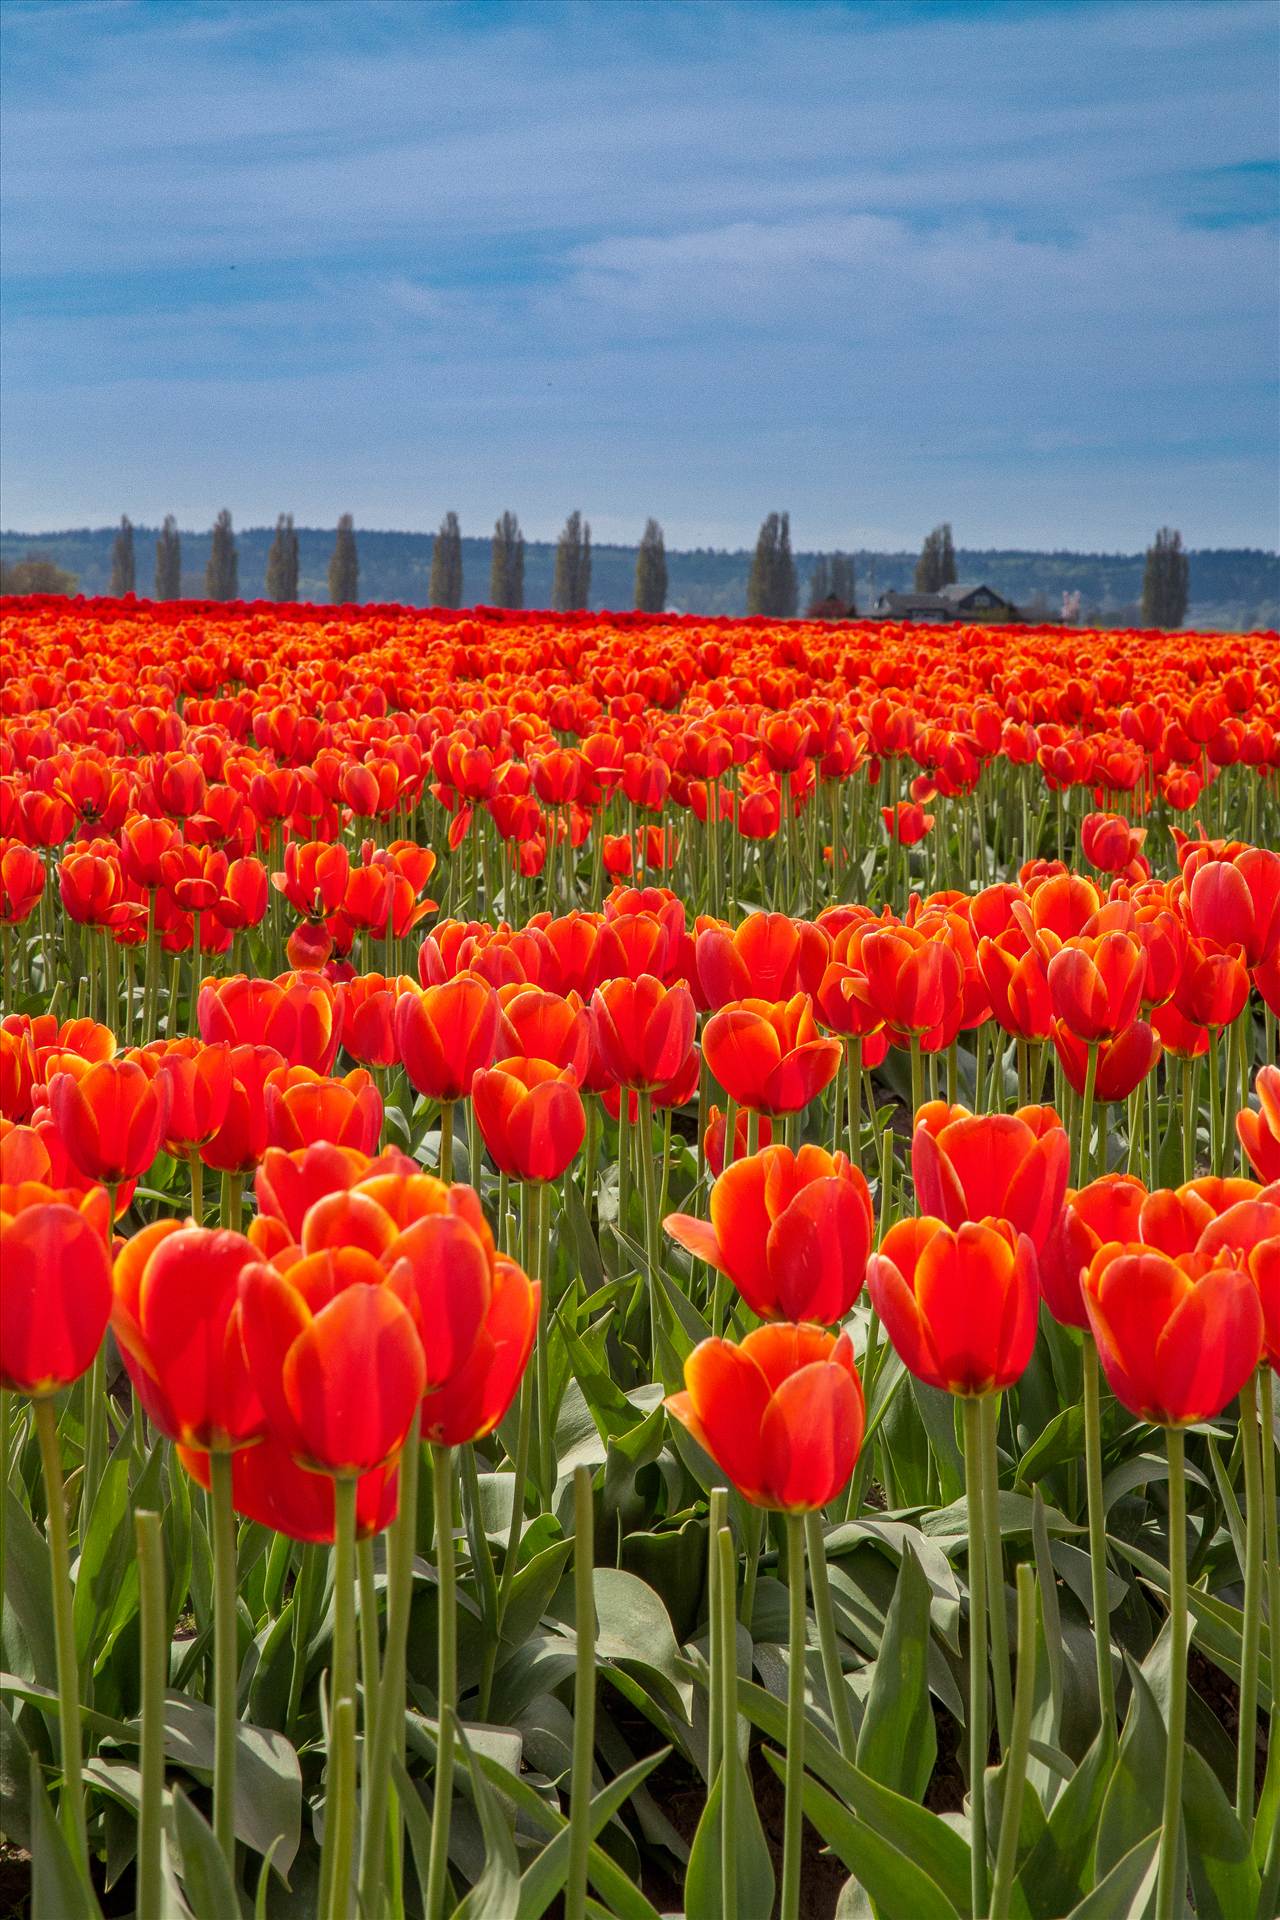 Standing Tall - From the 2012 Skagit County Tulip Festival. by Scott Smith Photos